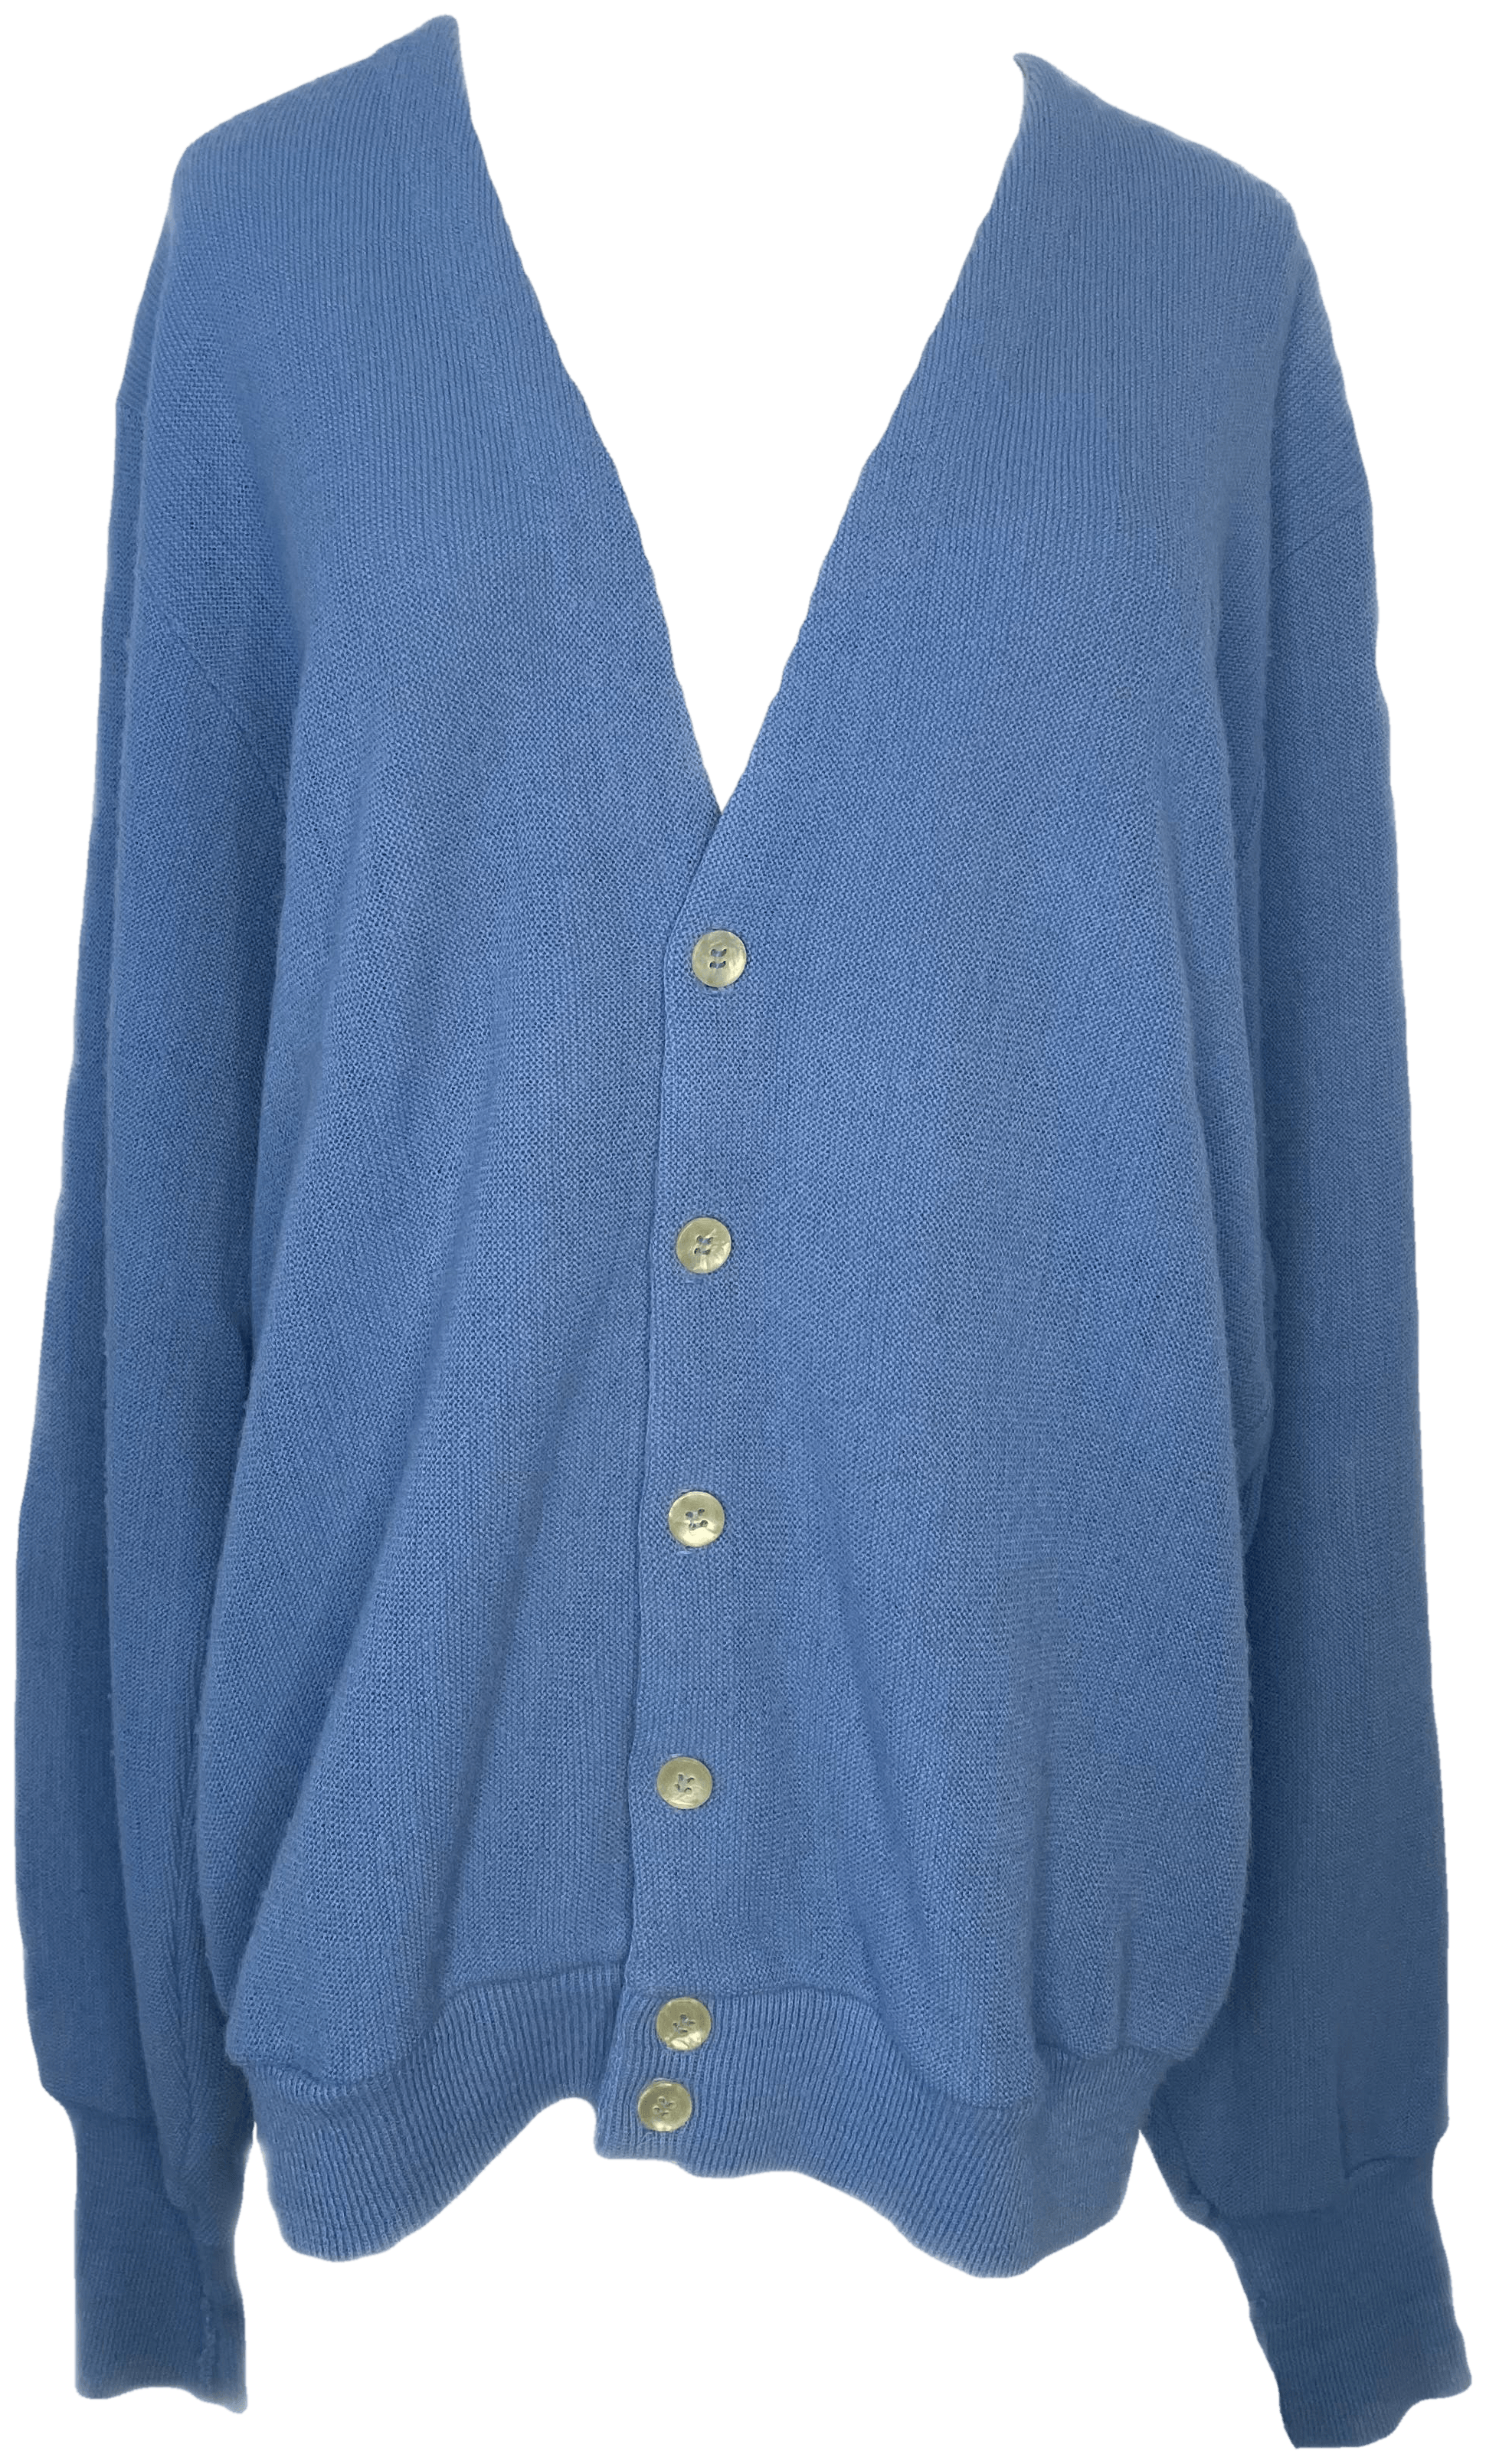 Vintage 80's Baby Blue Cardigan by Christian Dior | Shop THRILLING